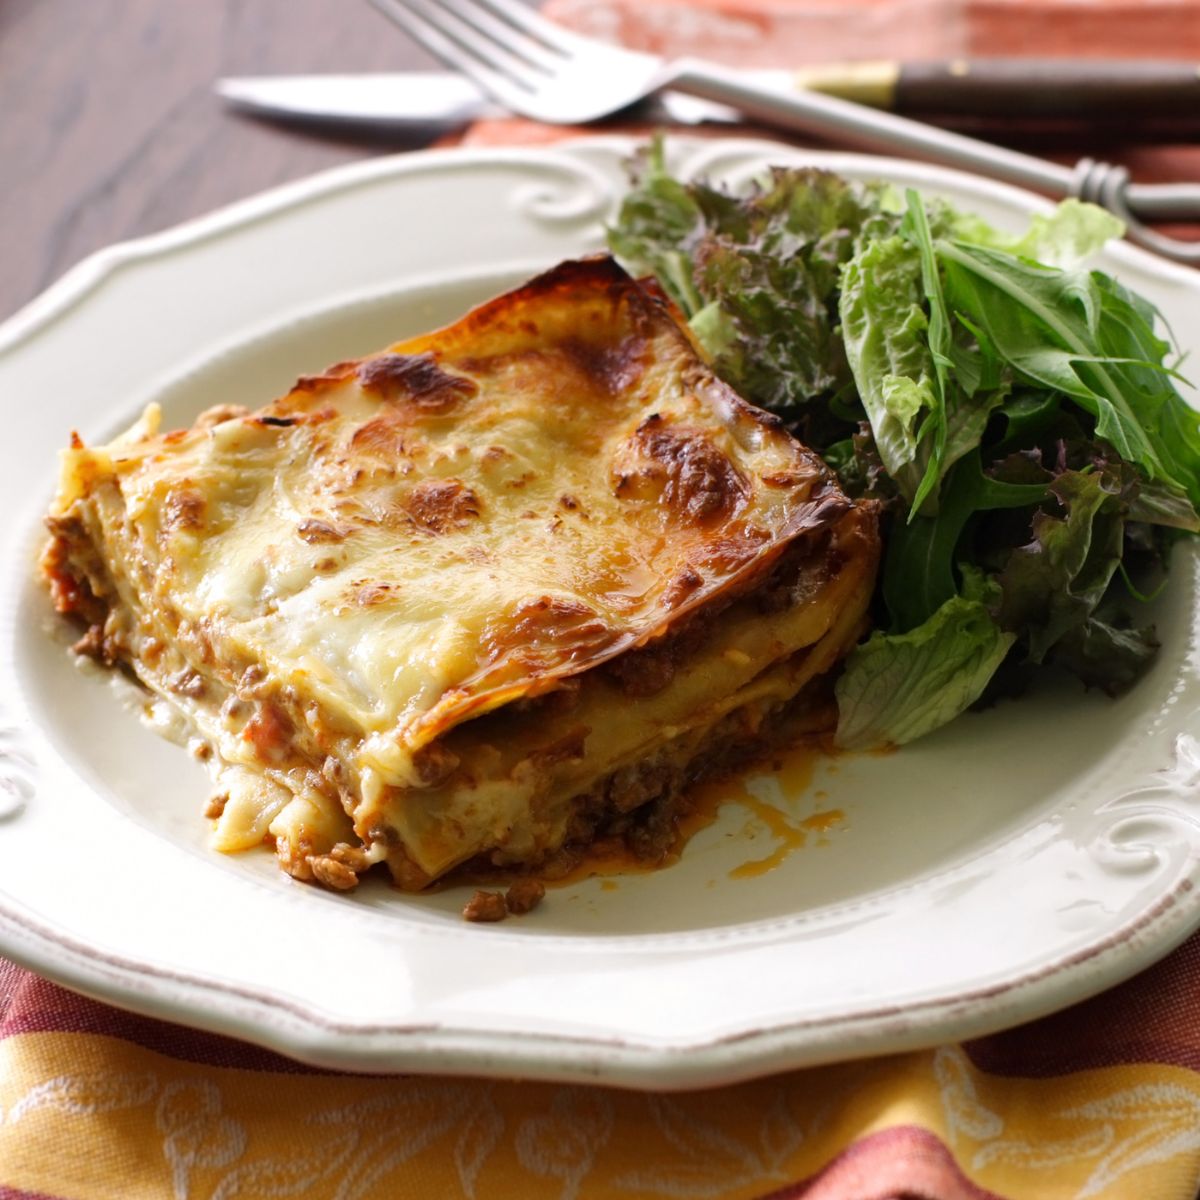 Image of slice of lasagna on a plate with a salad.